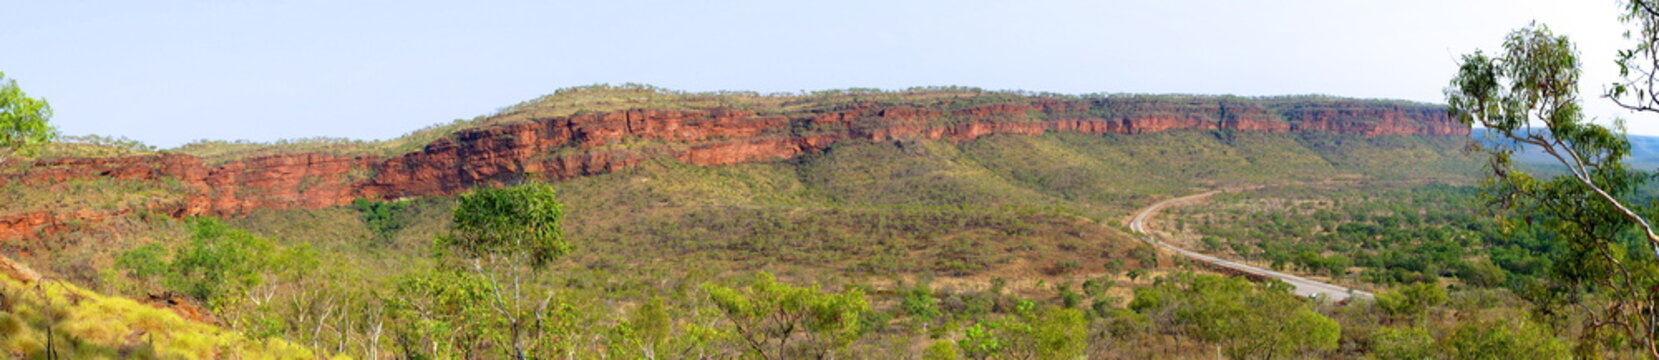 Gregory National Park, Nothern Territory Australia